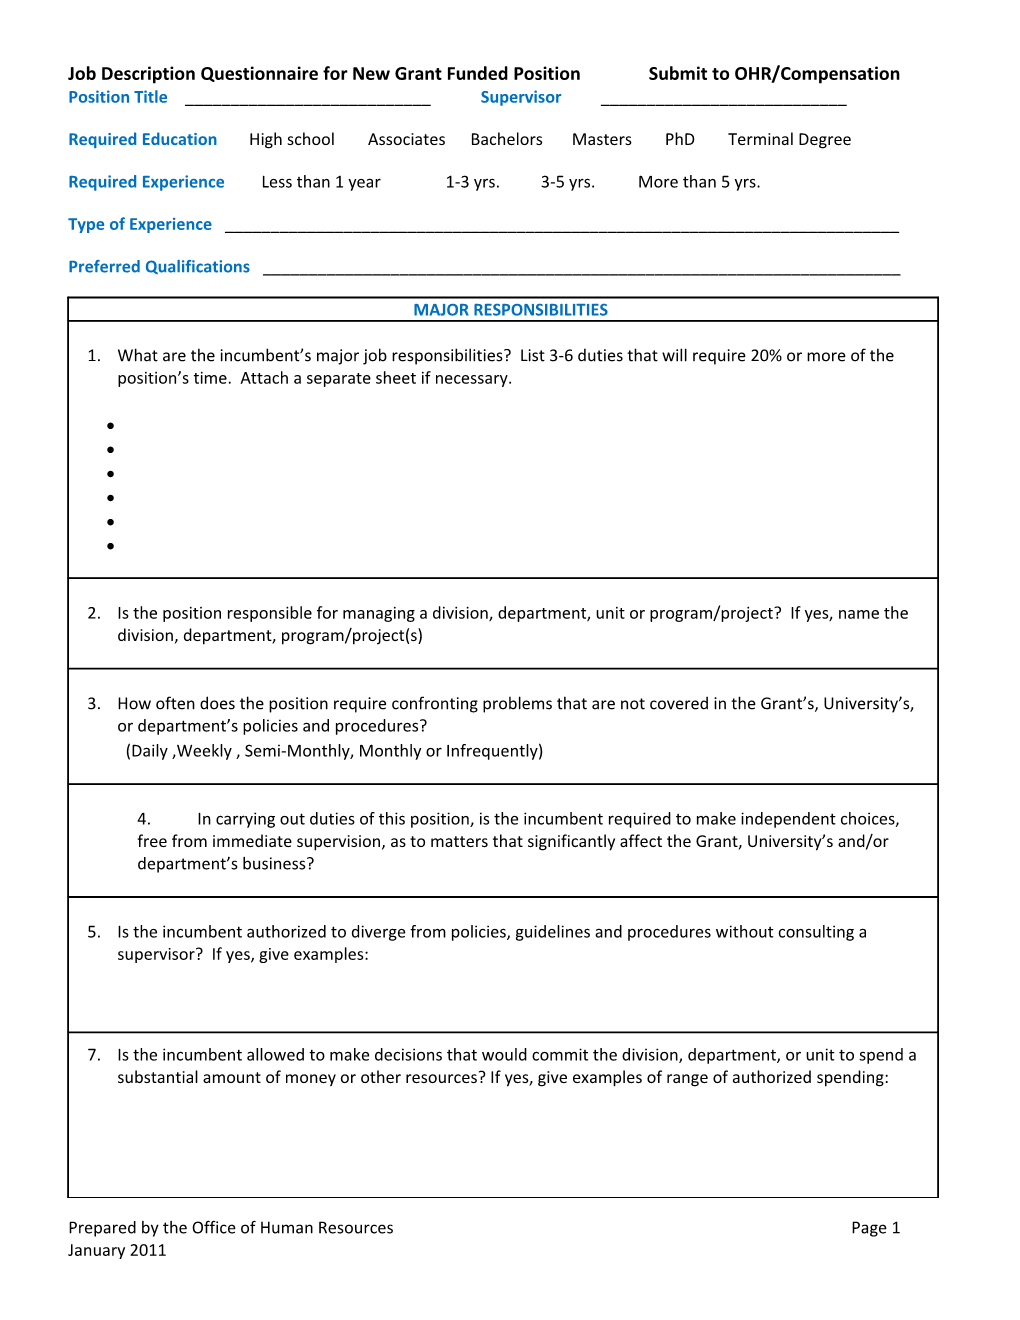 Job Description Questionnaire for New Grant Funded Positions